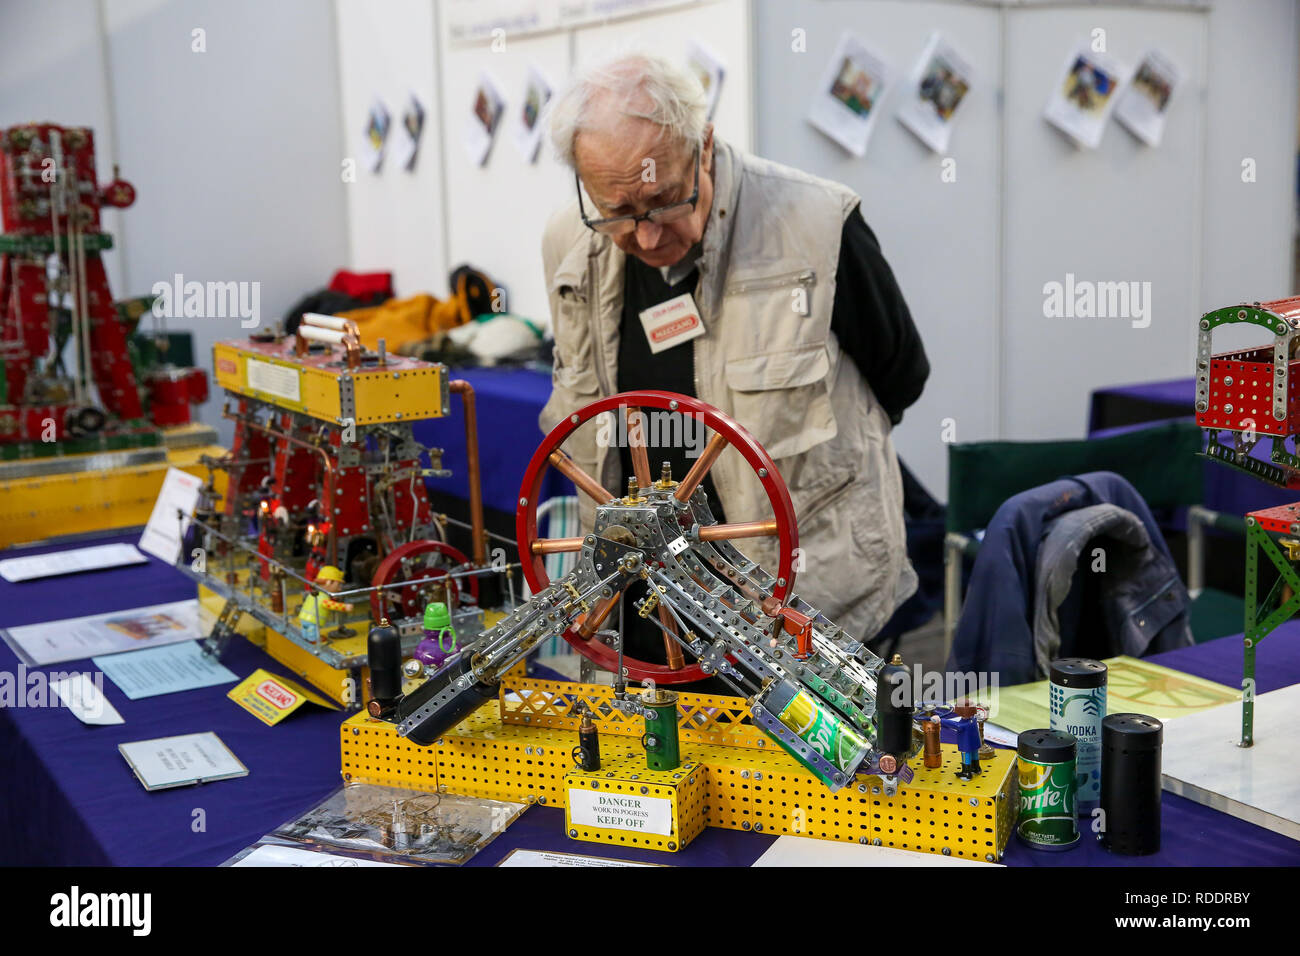 A man is seen viewing a Meccano set at the annual London Model Engineering Exhibition at Alexandra Palace, north London. Over 50 clubs and societies are exhibiting full spectrum of modeling from traditional model engineering, steam locomotives and traction engines through to the more modern gadgets including trucks, boats, aeroplanes and helicoptersÊwith nearly 2,000 models constructed by their members. Stock Photo